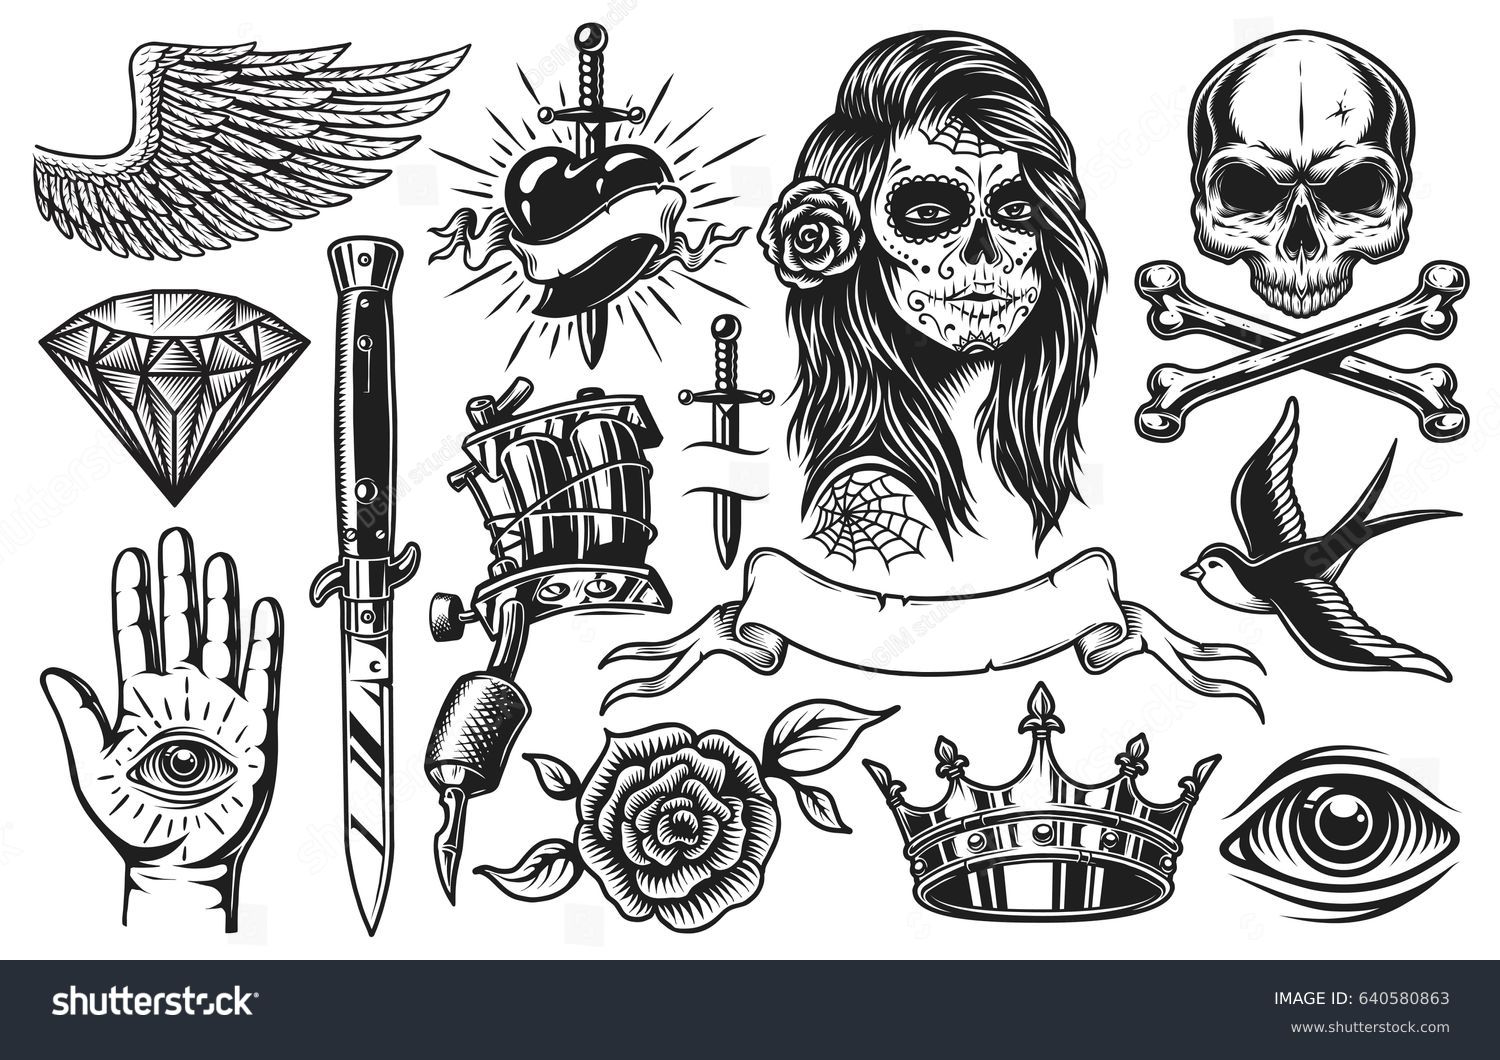 Set of vintage black and white tattoo elements isolated on white background #640580863